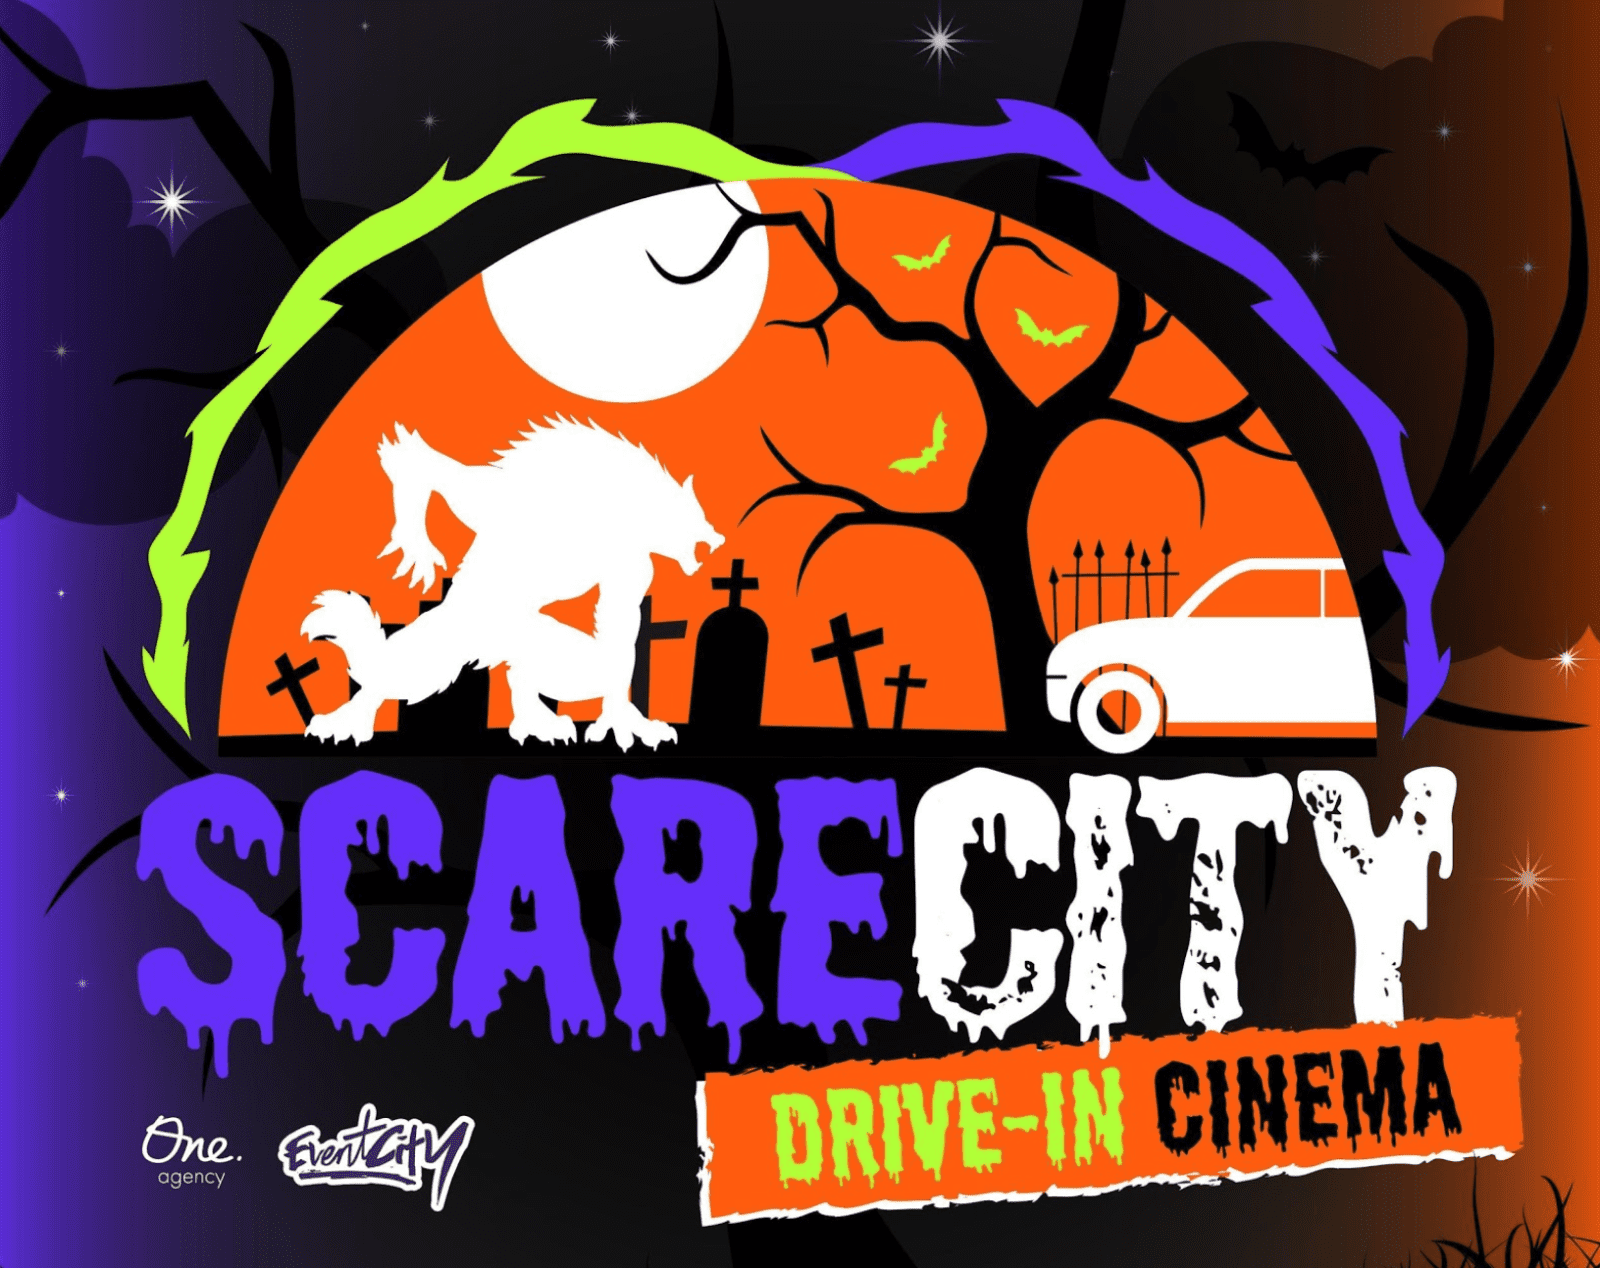 They&#8217;re showing both The Conjuring films at immersive drive-in cinema Scare City next month, The Manc